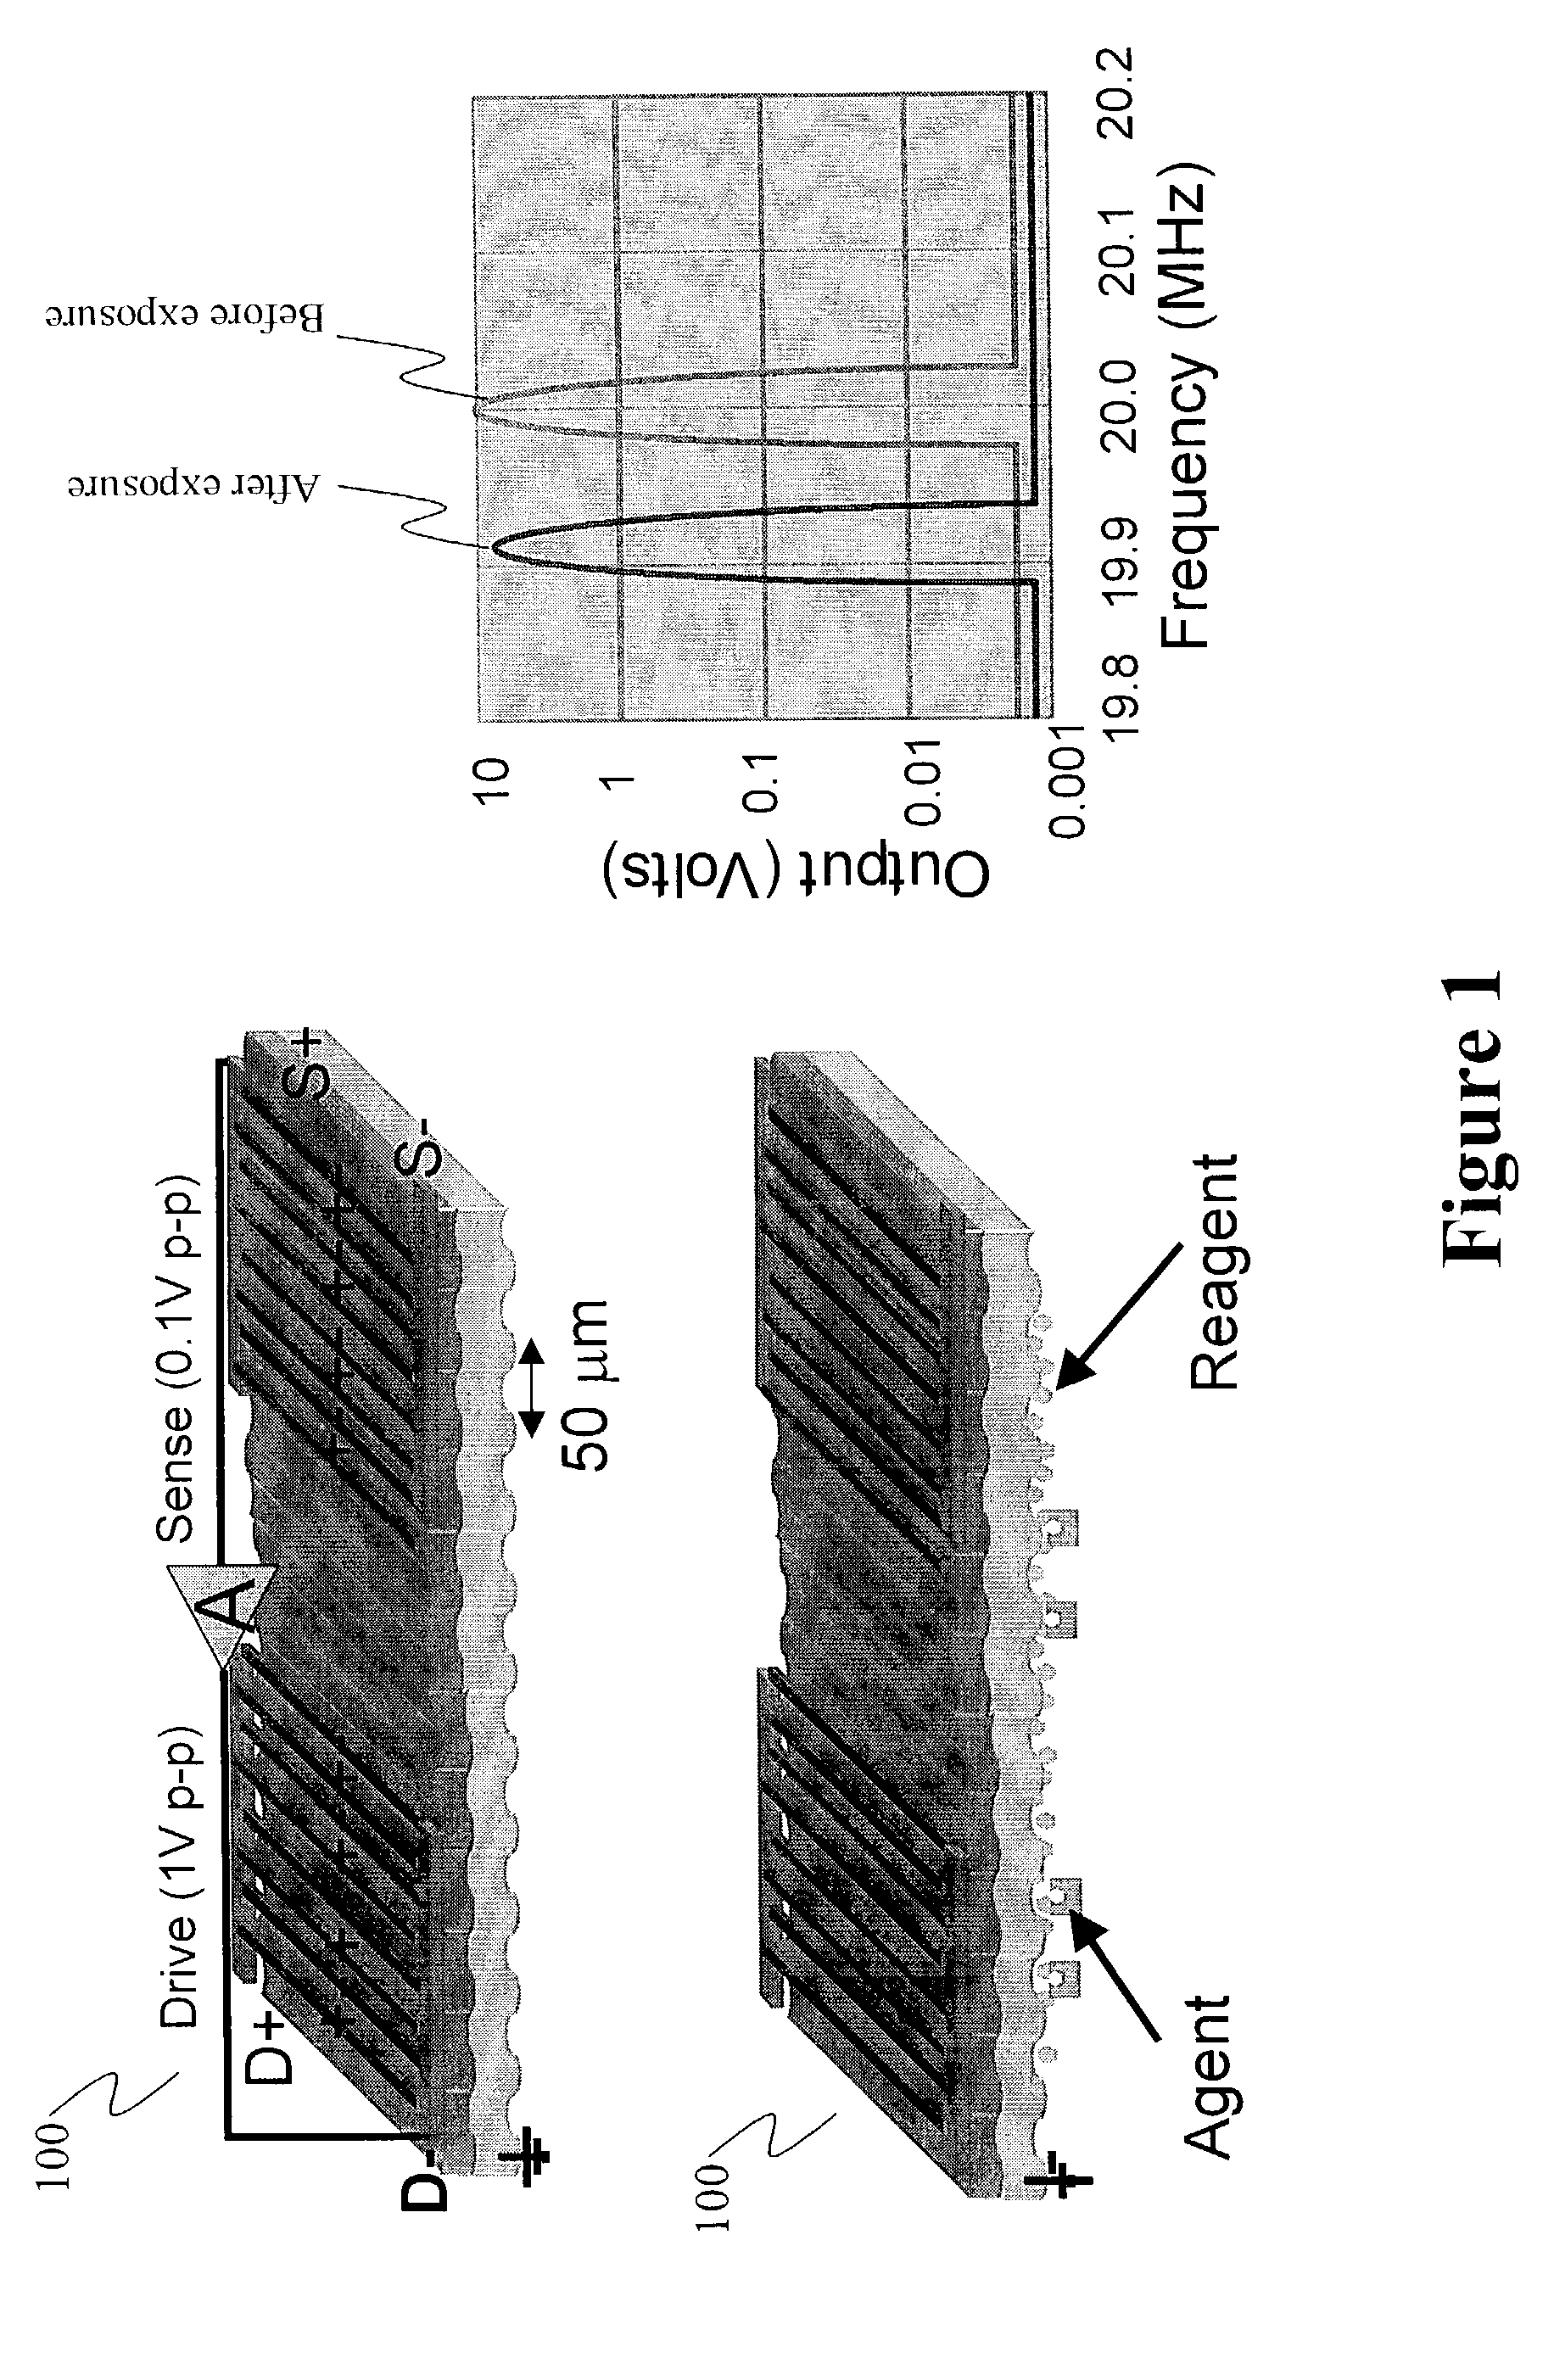 Method and apparatus for analyzing spatial and temporal processes of interaction